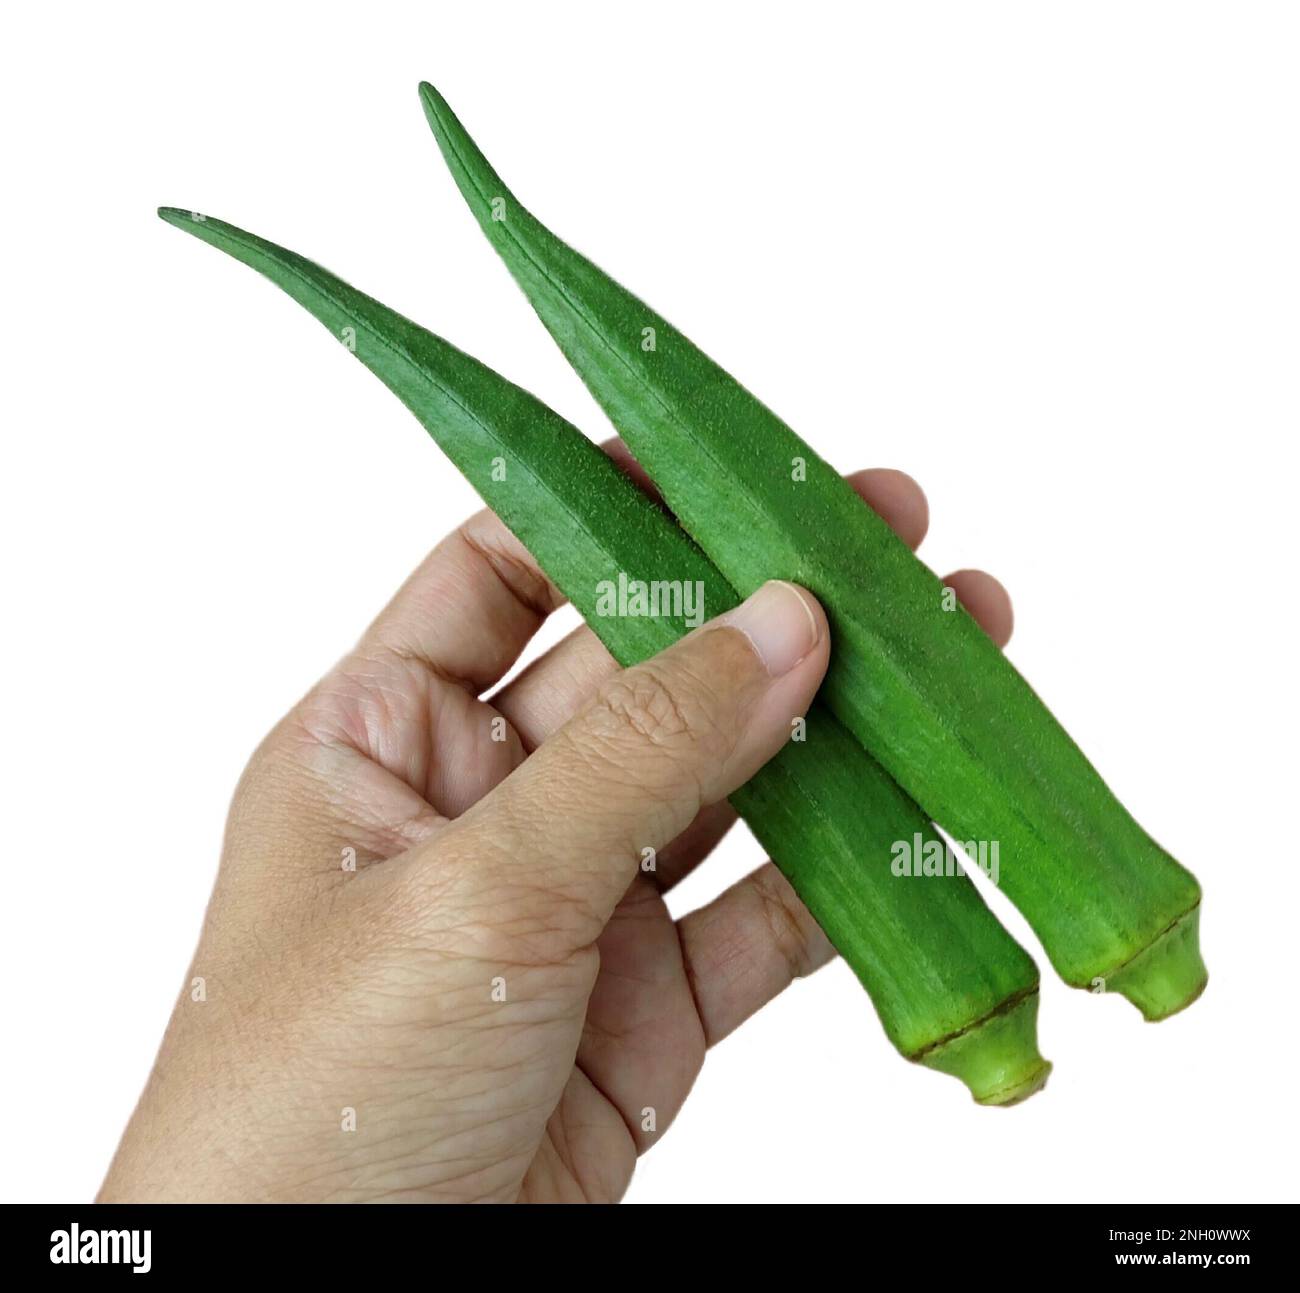 Vegetable and Herb, Hand Holding Okra or Lady Finger Fruits Preparing for Cooking. Stock Photo